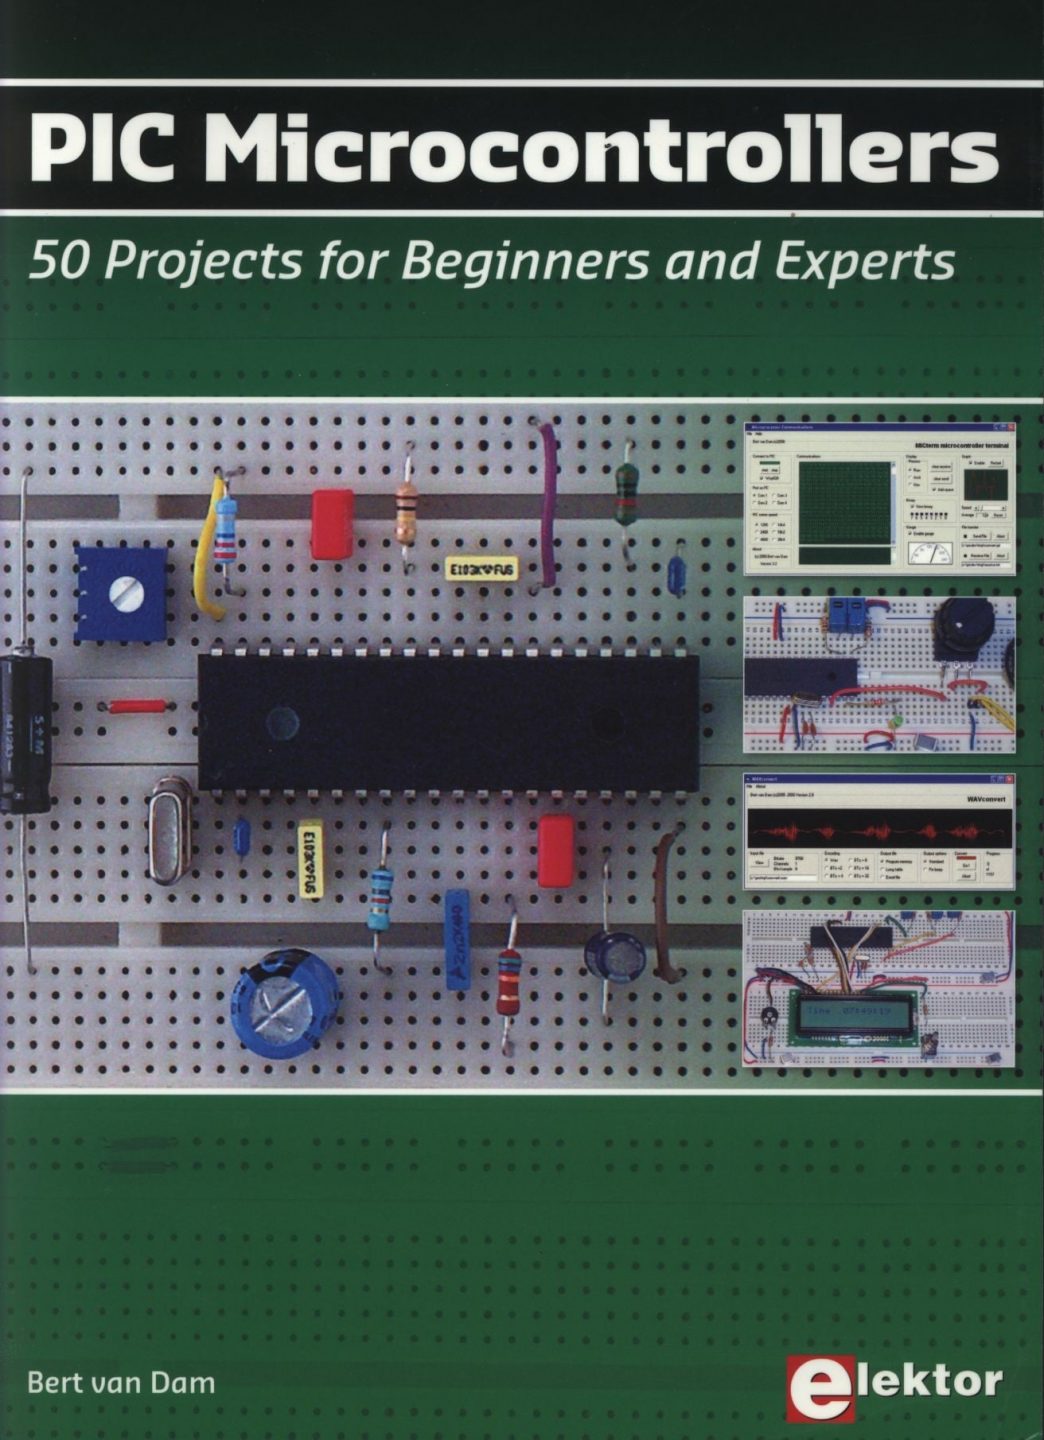 PIC Microcontrollers: 50 Projects for Beginners and Experts 1 Edición Bert van Dam PDF